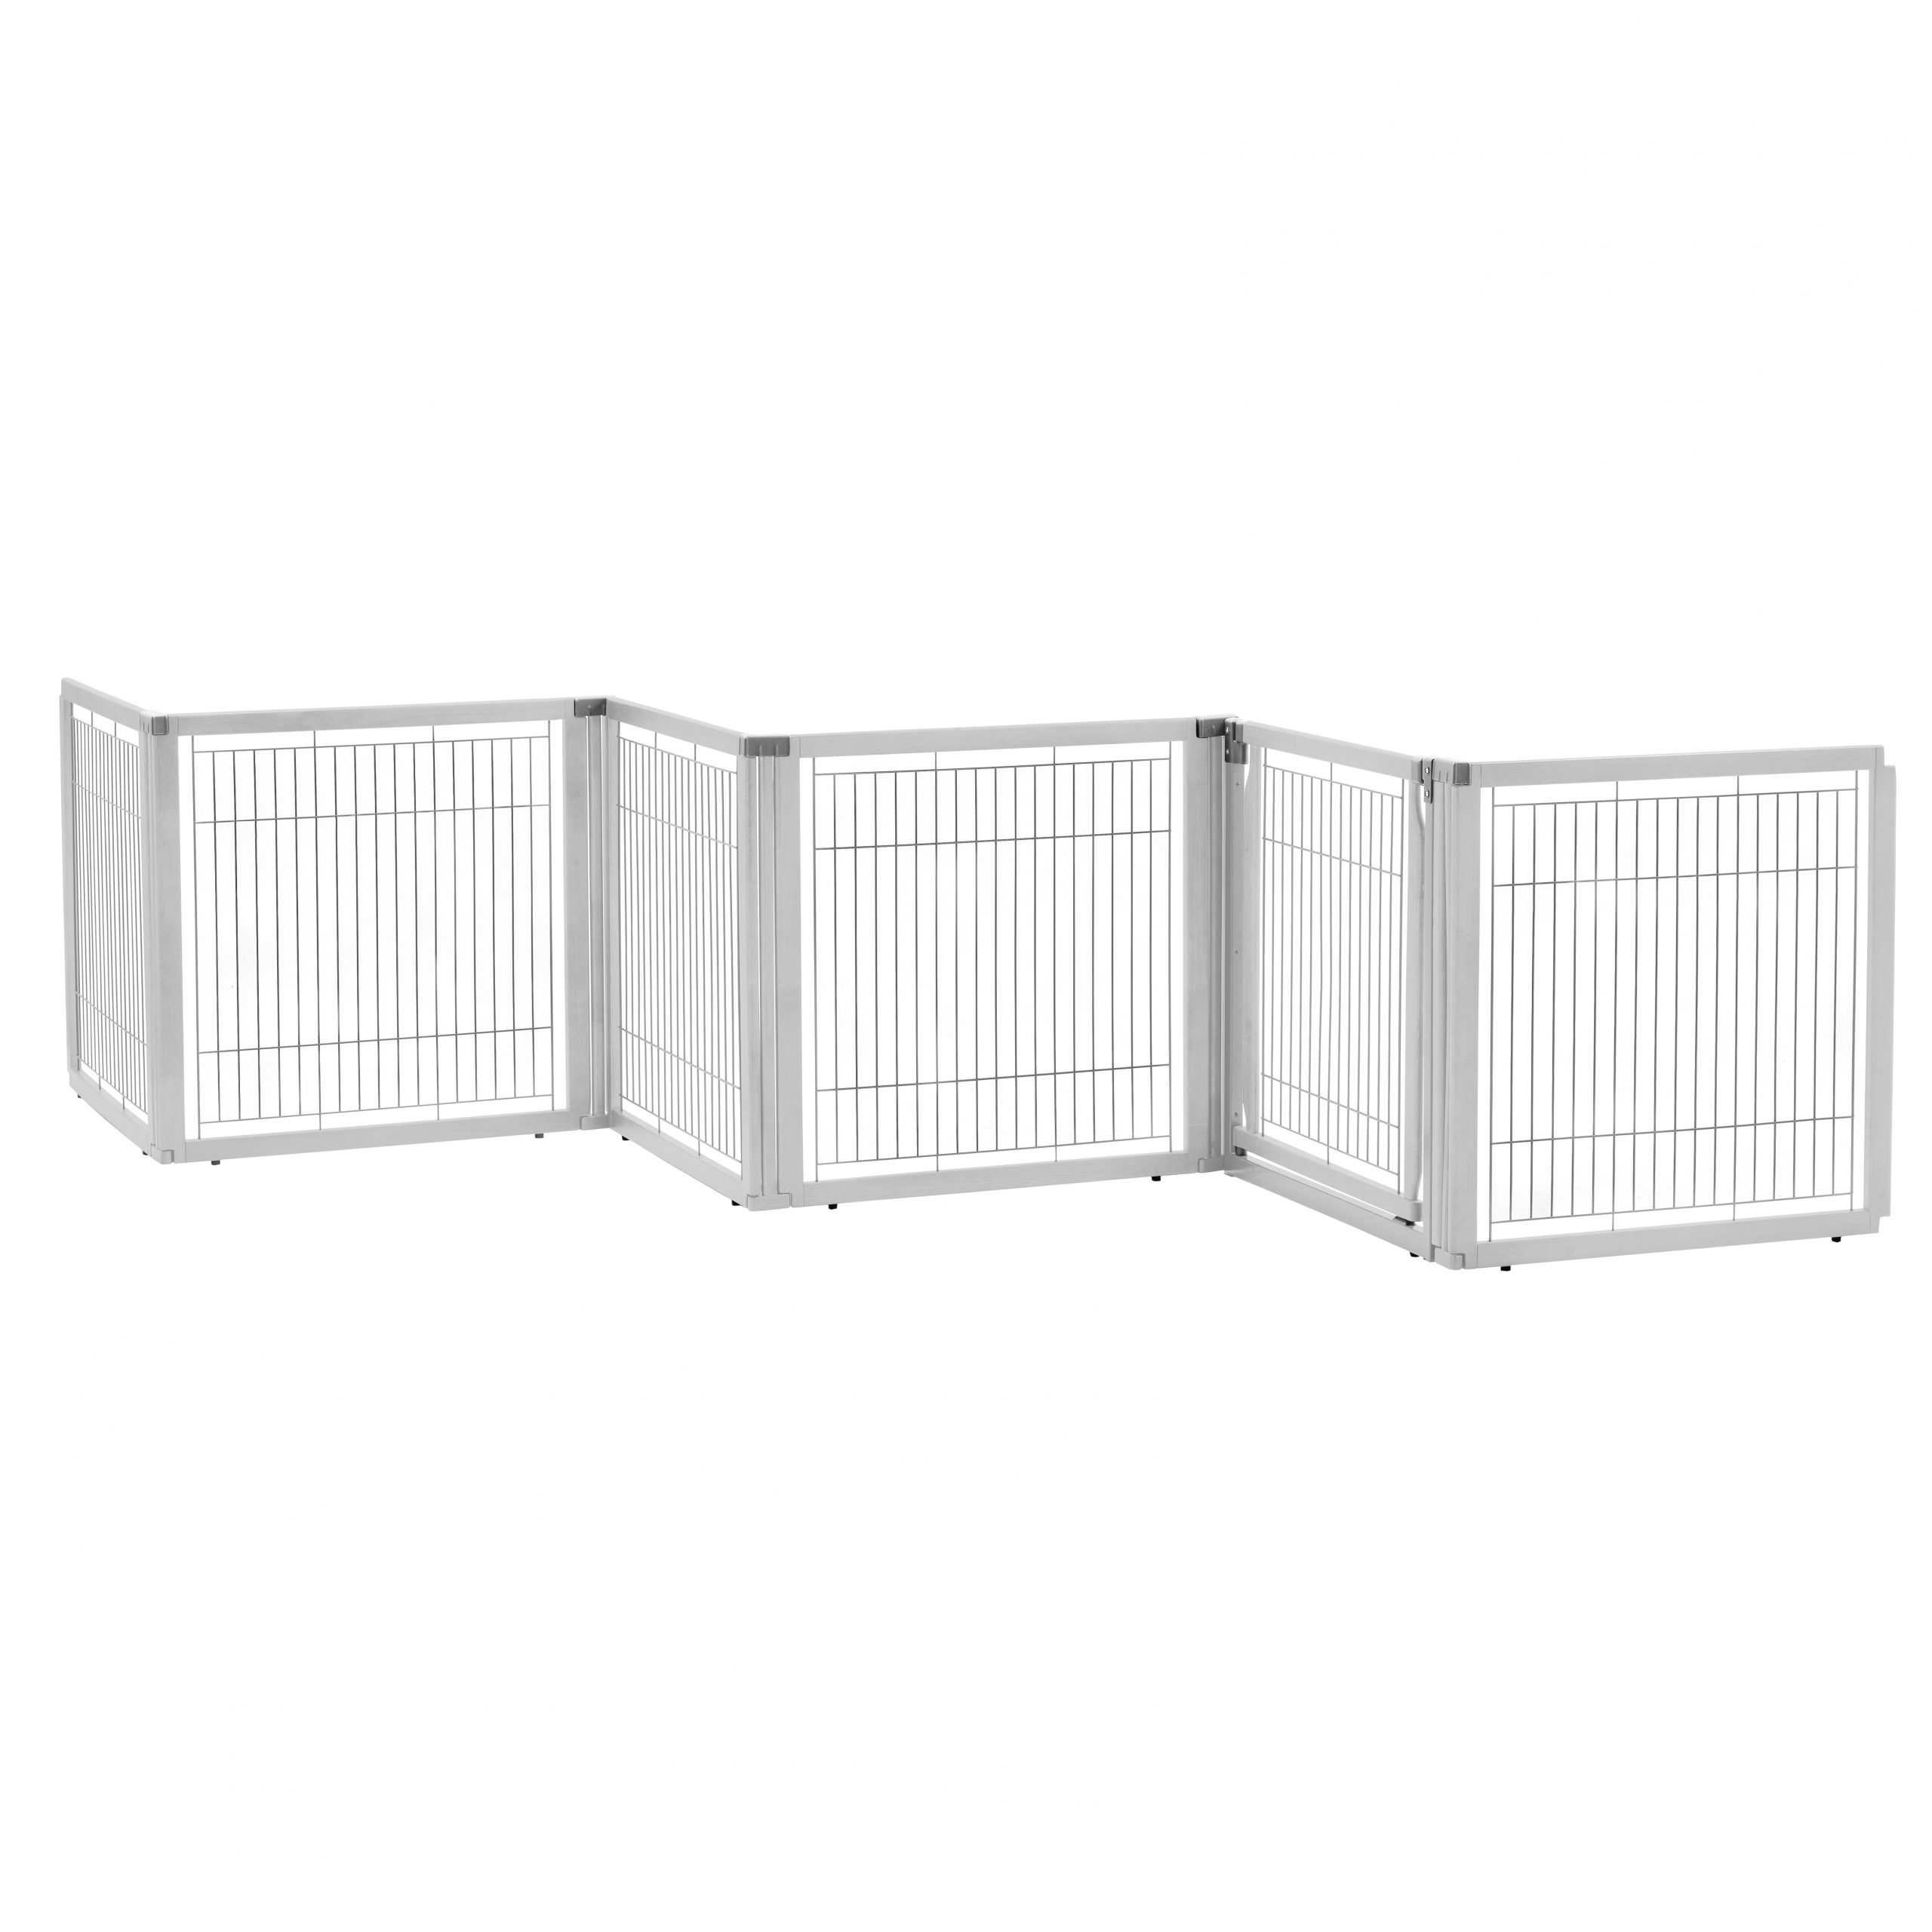 Richell 3-in-1 Convertible Elite Pet Gate 